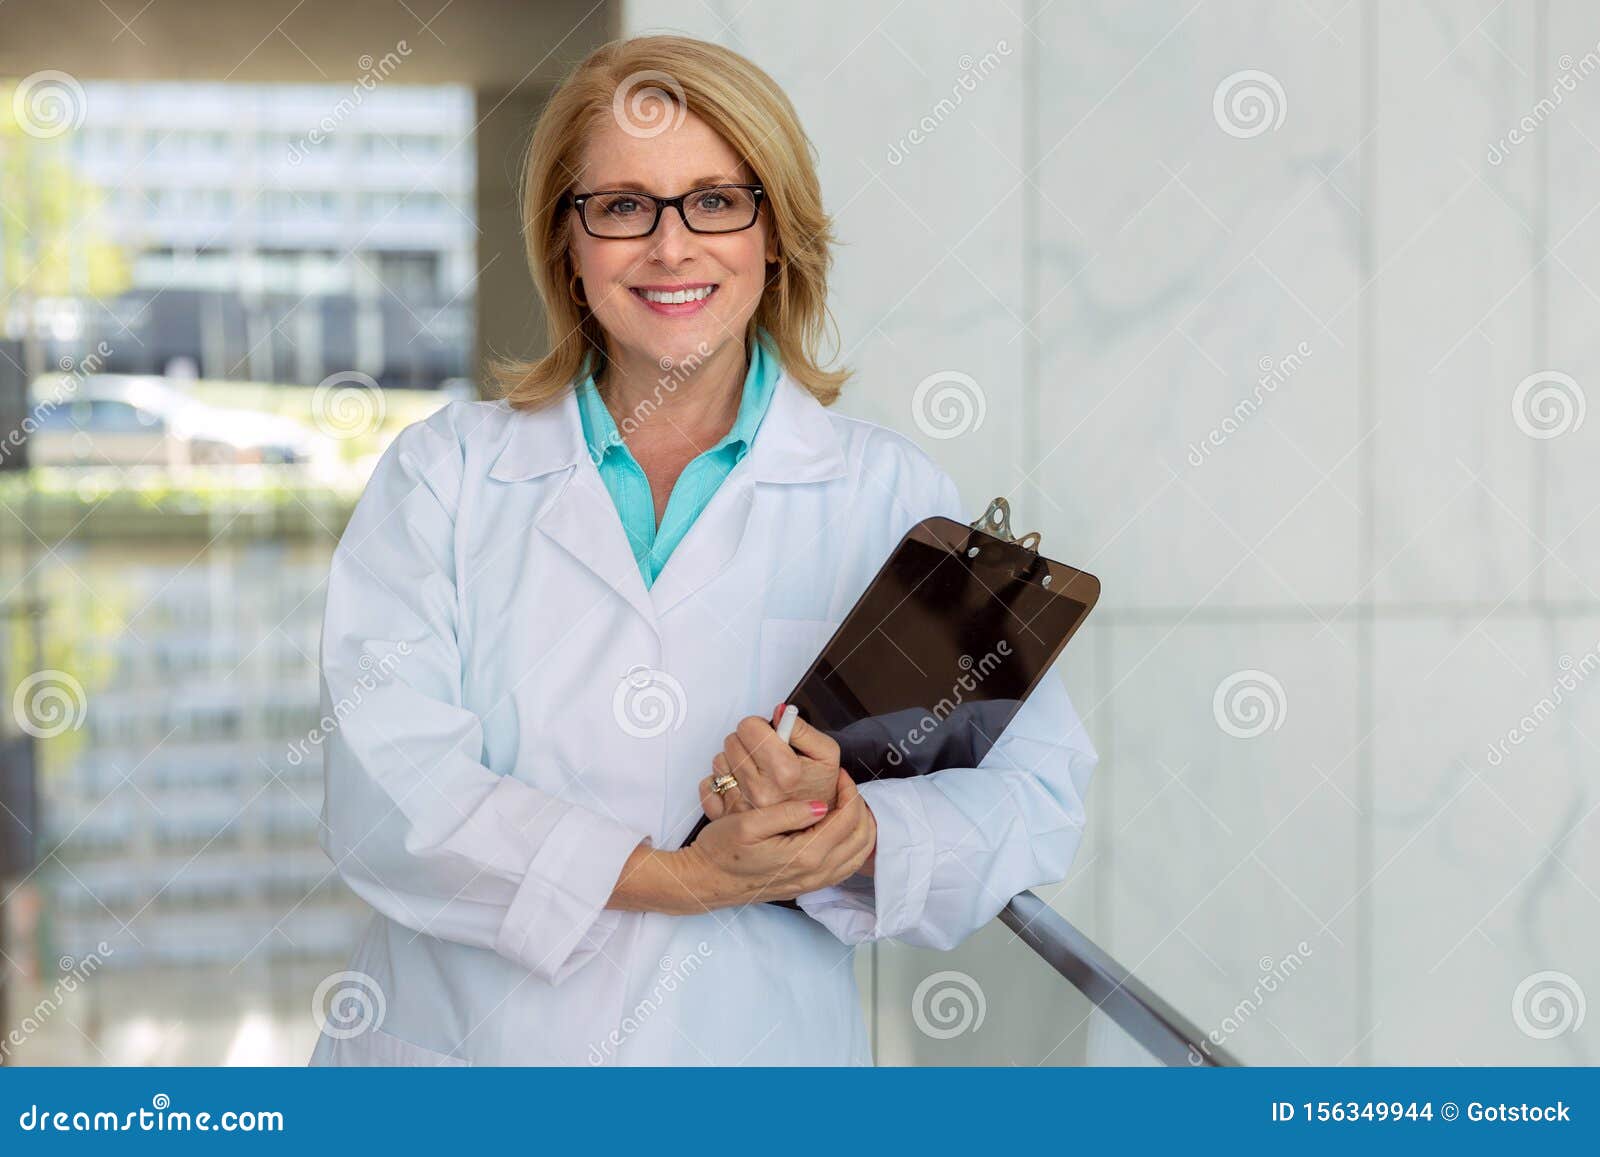 female nurse, doctor, health care practitioner, standing lifestyle working portrait in hospital hallway, smiling and cheerful